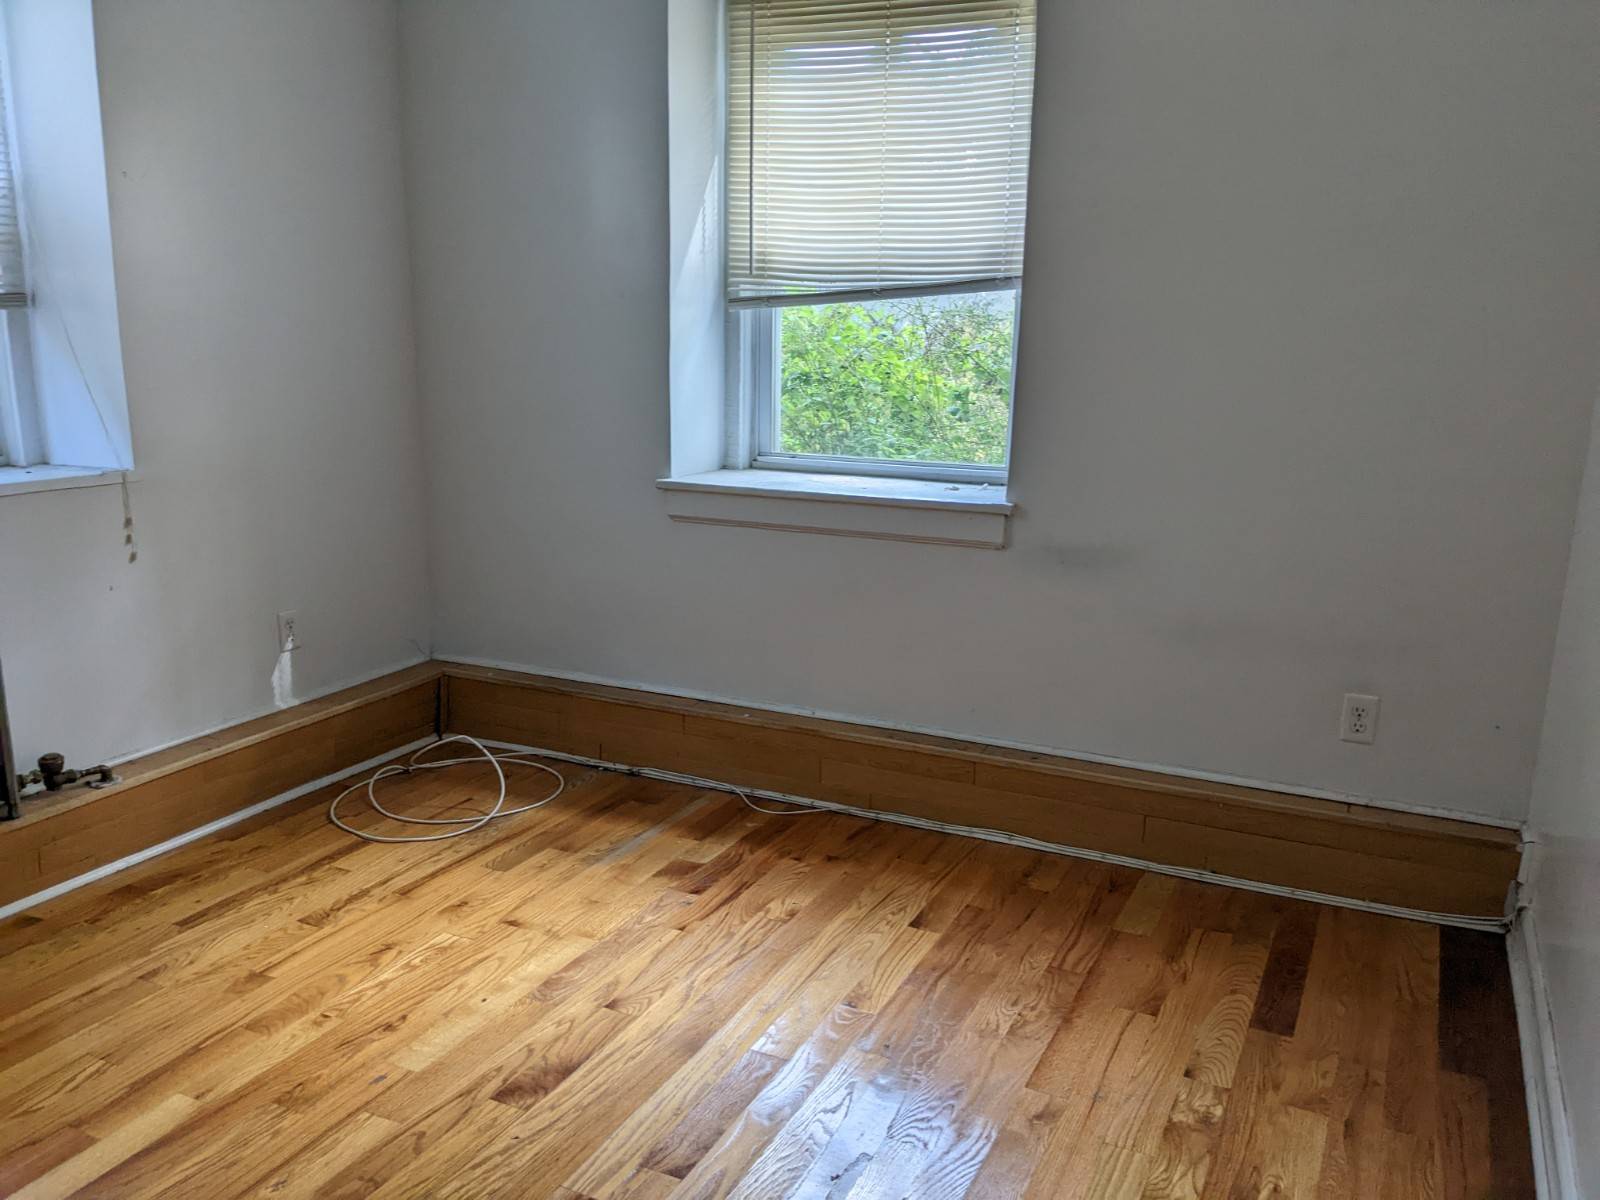 3 Bed 2 bath unit in Teaneck